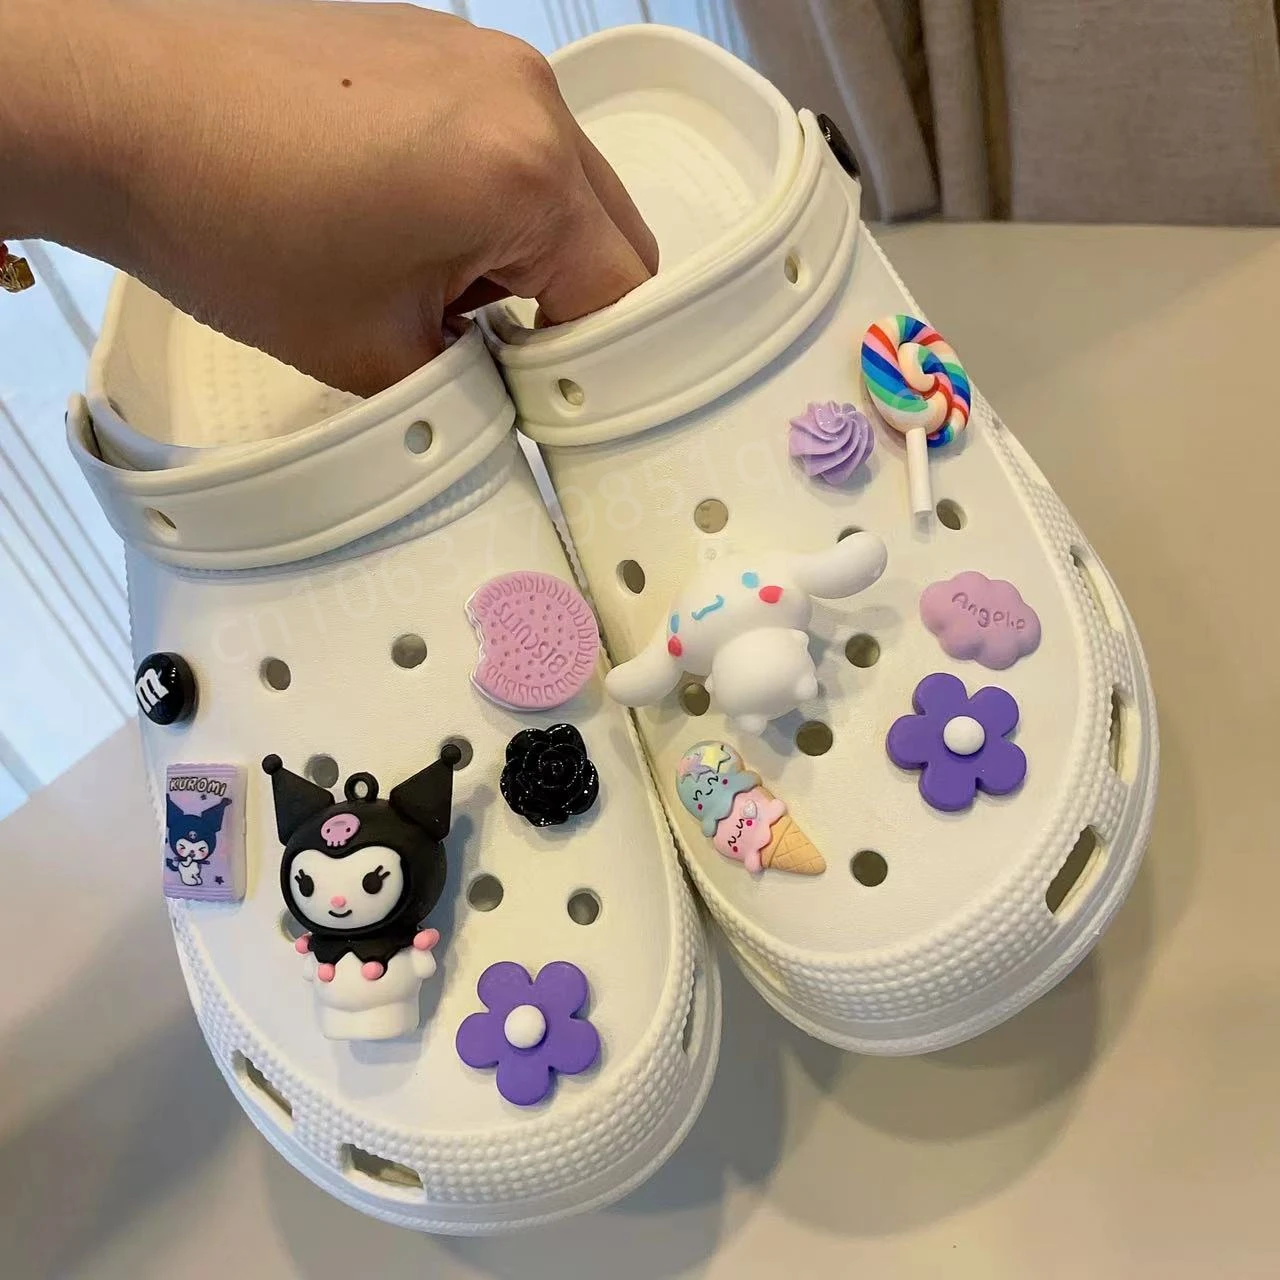 

Sanrio Shoe Charms Aceessories Anime Kuromi Cinnamoroll Hello Kitty Melody Fit Crocs Sandals Buckle Decoration Kids Gifts set